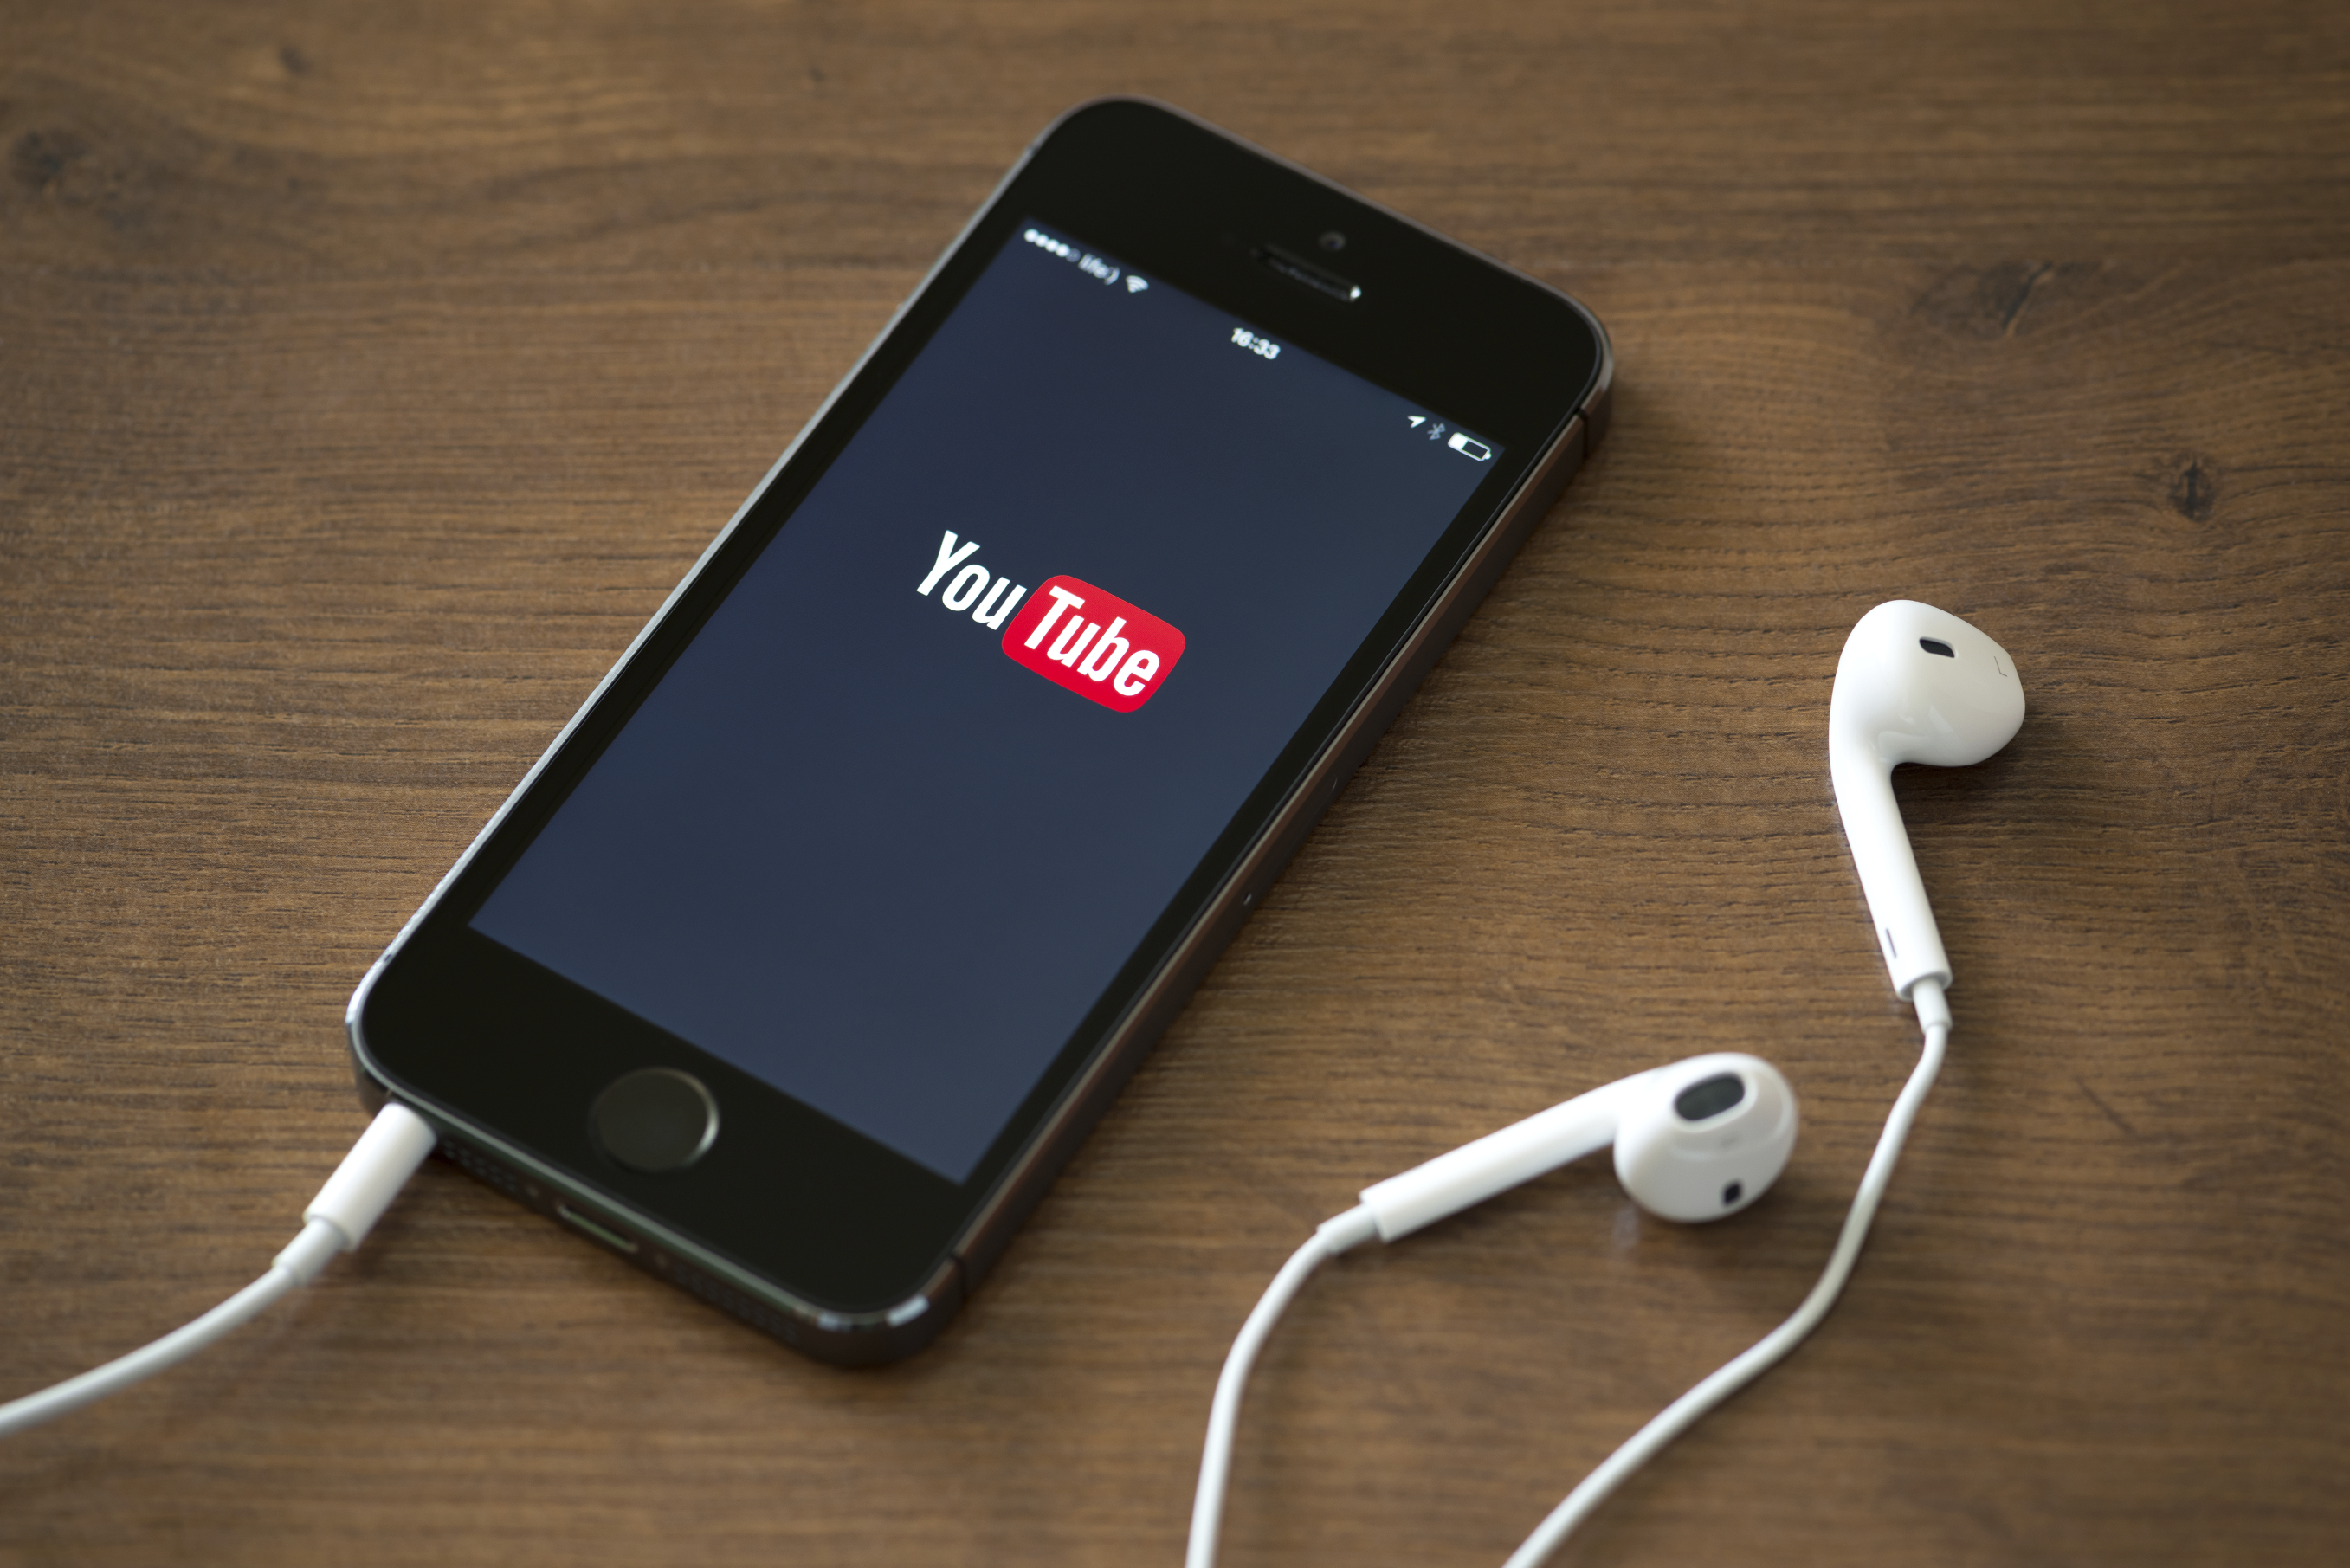 YouTube application on Apple iPhone 5S